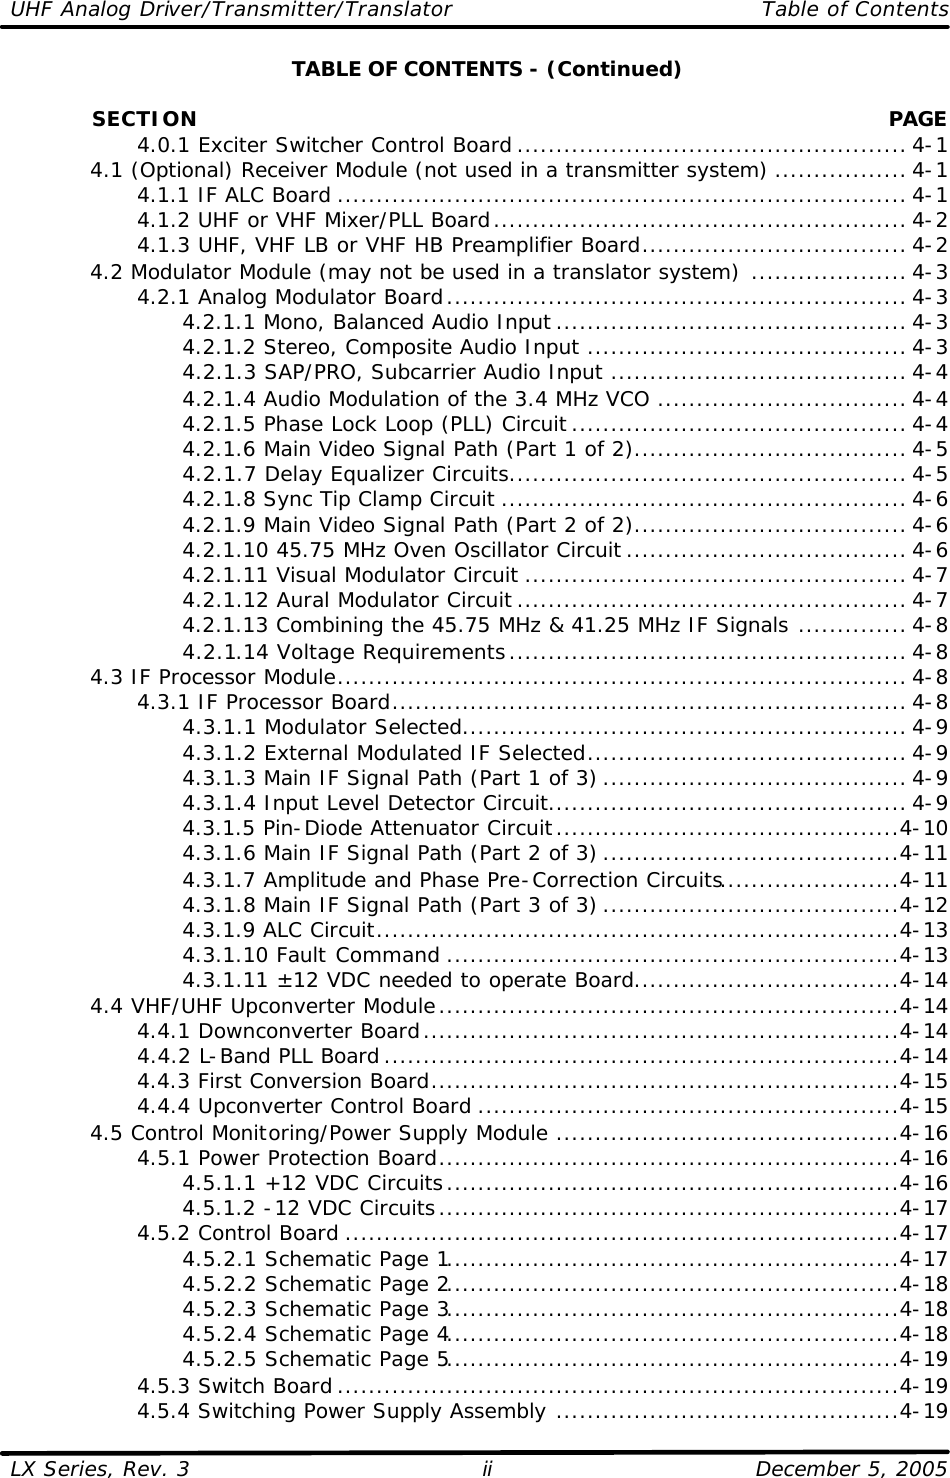 UHF Analog Driver/Transmitter/Translator   Table of Contents  LX Series, Rev. 3    December 5, 2005 ii TABLE OF CONTENTS - (Continued)              SECTION PAGE     4.0.1 Exciter Switcher Control Board .................................................. 4-1  4.1 (Optional) Receiver Module (not used in a transmitter system) ................. 4-1     4.1.1 IF ALC Board ......................................................................... 4-1     4.1.2 UHF or VHF Mixer/PLL Board..................................................... 4-2     4.1.3 UHF, VHF LB or VHF HB Preamplifier Board.................................. 4-2  4.2 Modulator Module (may not be used in a translator system) .................... 4-3     4.2.1 Analog Modulator Board........................................................... 4-3       4.2.1.1 Mono, Balanced Audio Input ............................................. 4-3       4.2.1.2 Stereo, Composite Audio Input ......................................... 4-3       4.2.1.3 SAP/PRO, Subcarrier Audio Input ...................................... 4-4       4.2.1.4 Audio Modulation of the 3.4 MHz VCO ................................ 4-4       4.2.1.5 Phase Lock Loop (PLL) Circuit ........................................... 4-4       4.2.1.6 Main Video Signal Path (Part 1 of 2)................................... 4-5       4.2.1.7 Delay Equalizer Circuits................................................... 4-5       4.2.1.8 Sync Tip Clamp Circuit .................................................... 4-6       4.2.1.9 Main Video Signal Path (Part 2 of 2)................................... 4-6       4.2.1.10 45.75 MHz Oven Oscillator Circuit .................................... 4-6       4.2.1.11 Visual Modulator Circuit ................................................. 4-7       4.2.1.12 Aural Modulator Circuit .................................................. 4-7       4.2.1.13 Combining the 45.75 MHz &amp; 41.25 MHz IF Signals .............. 4-8       4.2.1.14 Voltage Requirements................................................... 4-8  4.3 IF Processor Module......................................................................... 4-8     4.3.1 IF Processor Board.................................................................. 4-8       4.3.1.1 Modulator Selected......................................................... 4-9       4.3.1.2 External Modulated IF Selected......................................... 4-9       4.3.1.3 Main IF Signal Path (Part 1 of 3) ....................................... 4-9       4.3.1.4 Input Level Detector Circuit.............................................. 4-9       4.3.1.5 Pin-Diode Attenuator Circuit............................................4-10       4.3.1.6 Main IF Signal Path (Part 2 of 3) ......................................4-11       4.3.1.7 Amplitude and Phase Pre-Correction Circuits.......................4-11       4.3.1.8 Main IF Signal Path (Part 3 of 3) ......................................4-12       4.3.1.9 ALC Circuit...................................................................4-13       4.3.1.10 Fault Command ..........................................................4-13       4.3.1.11 ±12 VDC needed to operate Board..................................4-14  4.4 VHF/UHF Upconverter Module...........................................................4-14     4.4.1 Downconverter Board.............................................................4-14     4.4.2 L-Band PLL Board ..................................................................4-14     4.4.3 First Conversion Board............................................................4-15     4.4.4 Upconverter Control Board ......................................................4-15  4.5 Control Monitoring/Power Supply Module ............................................4-16     4.5.1 Power Protection Board...........................................................4-16       4.5.1.1 +12 VDC Circuits..........................................................4-16       4.5.1.2 -12 VDC Circuits...........................................................4-17     4.5.2 Control Board .......................................................................4-17       4.5.2.1 Schematic Page 1..........................................................4-17       4.5.2.2 Schematic Page 2..........................................................4-18       4.5.2.3 Schematic Page 3..........................................................4-18       4.5.2.4 Schematic Page 4..........................................................4-18       4.5.2.5 Schematic Page 5..........................................................4-19     4.5.3 Switch Board ........................................................................4-19     4.5.4 Switching Power Supply Assembly ............................................4-19 